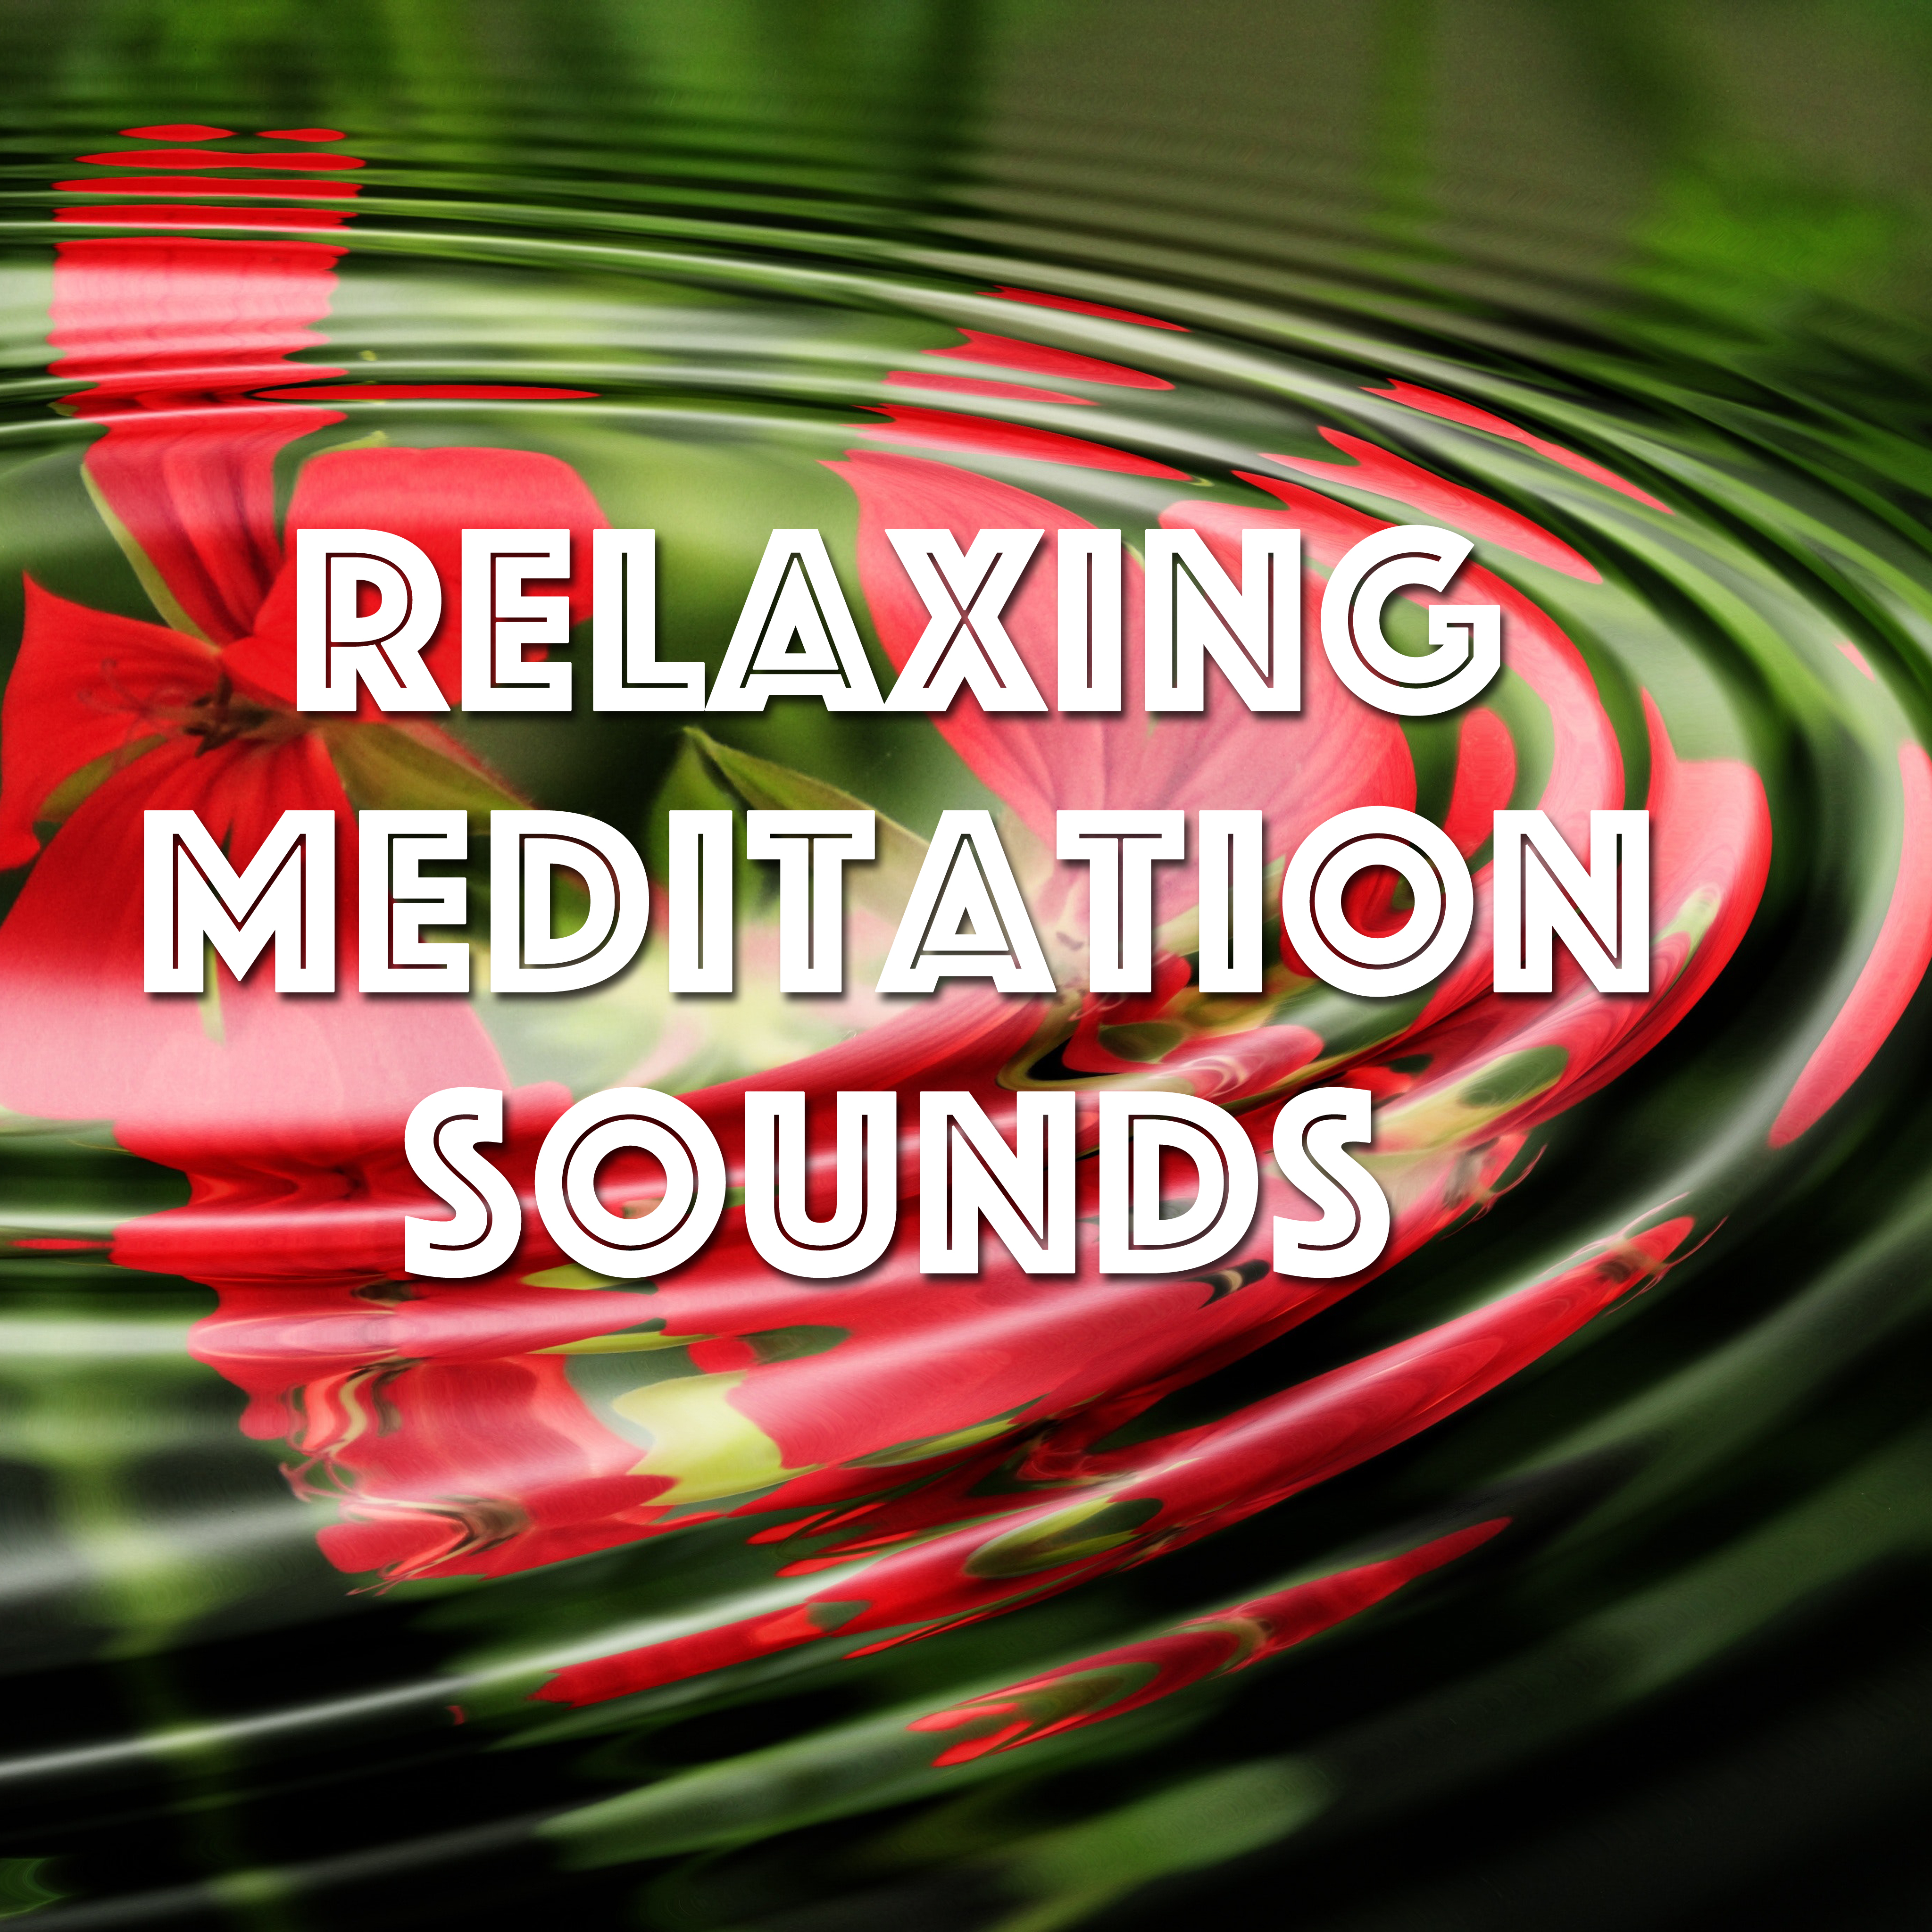 11 Relaxing Meditation Sounds: Music Mantras